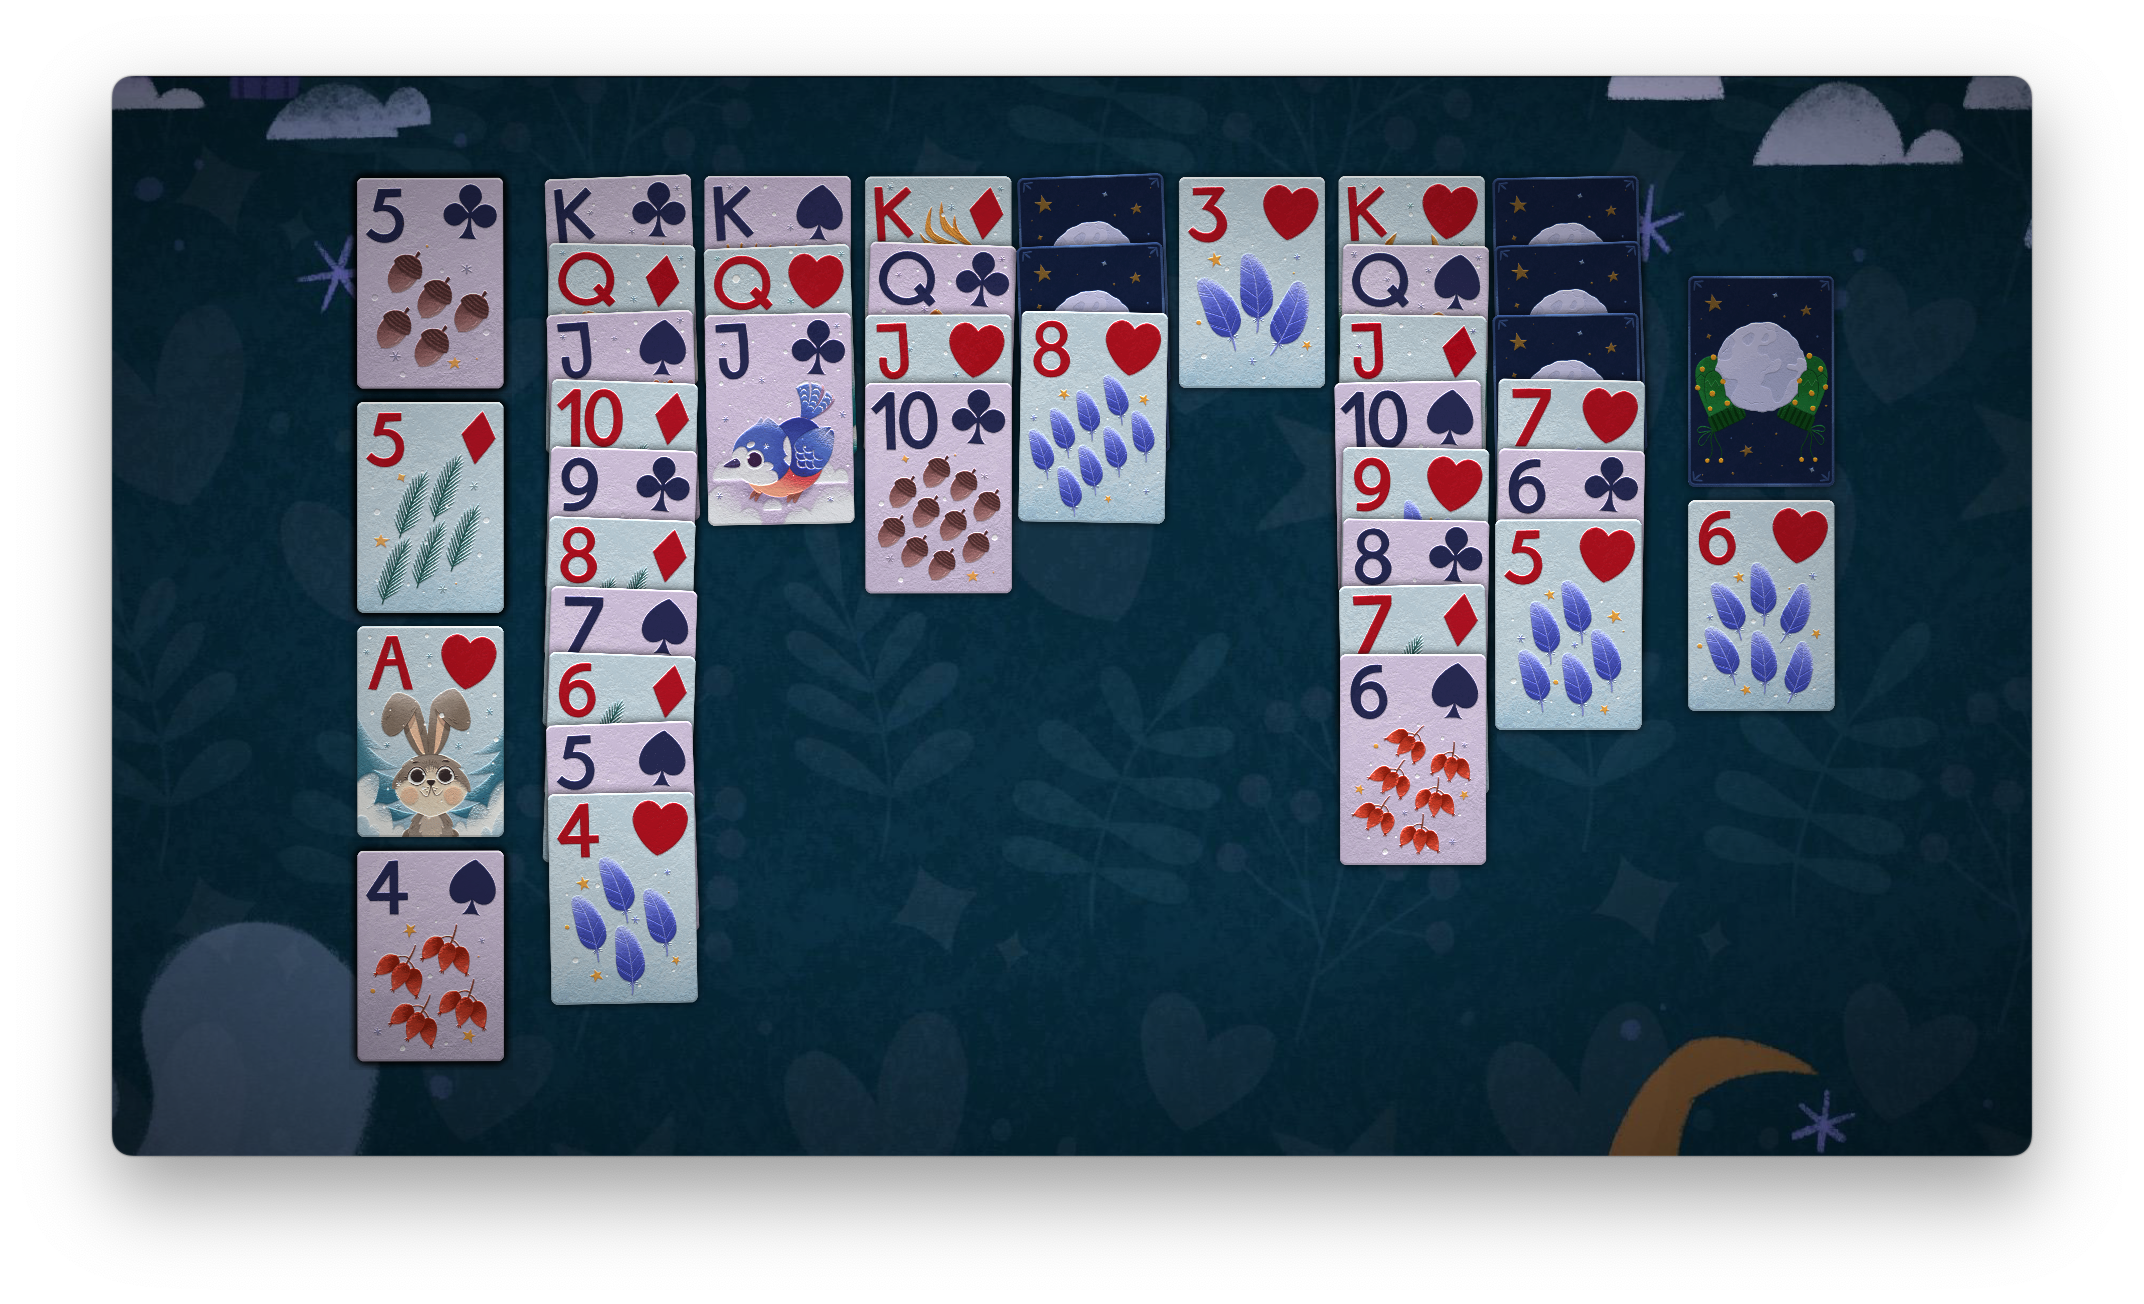 How to Play Spider Solitaire: Rules and Explanation - Solitaire Social